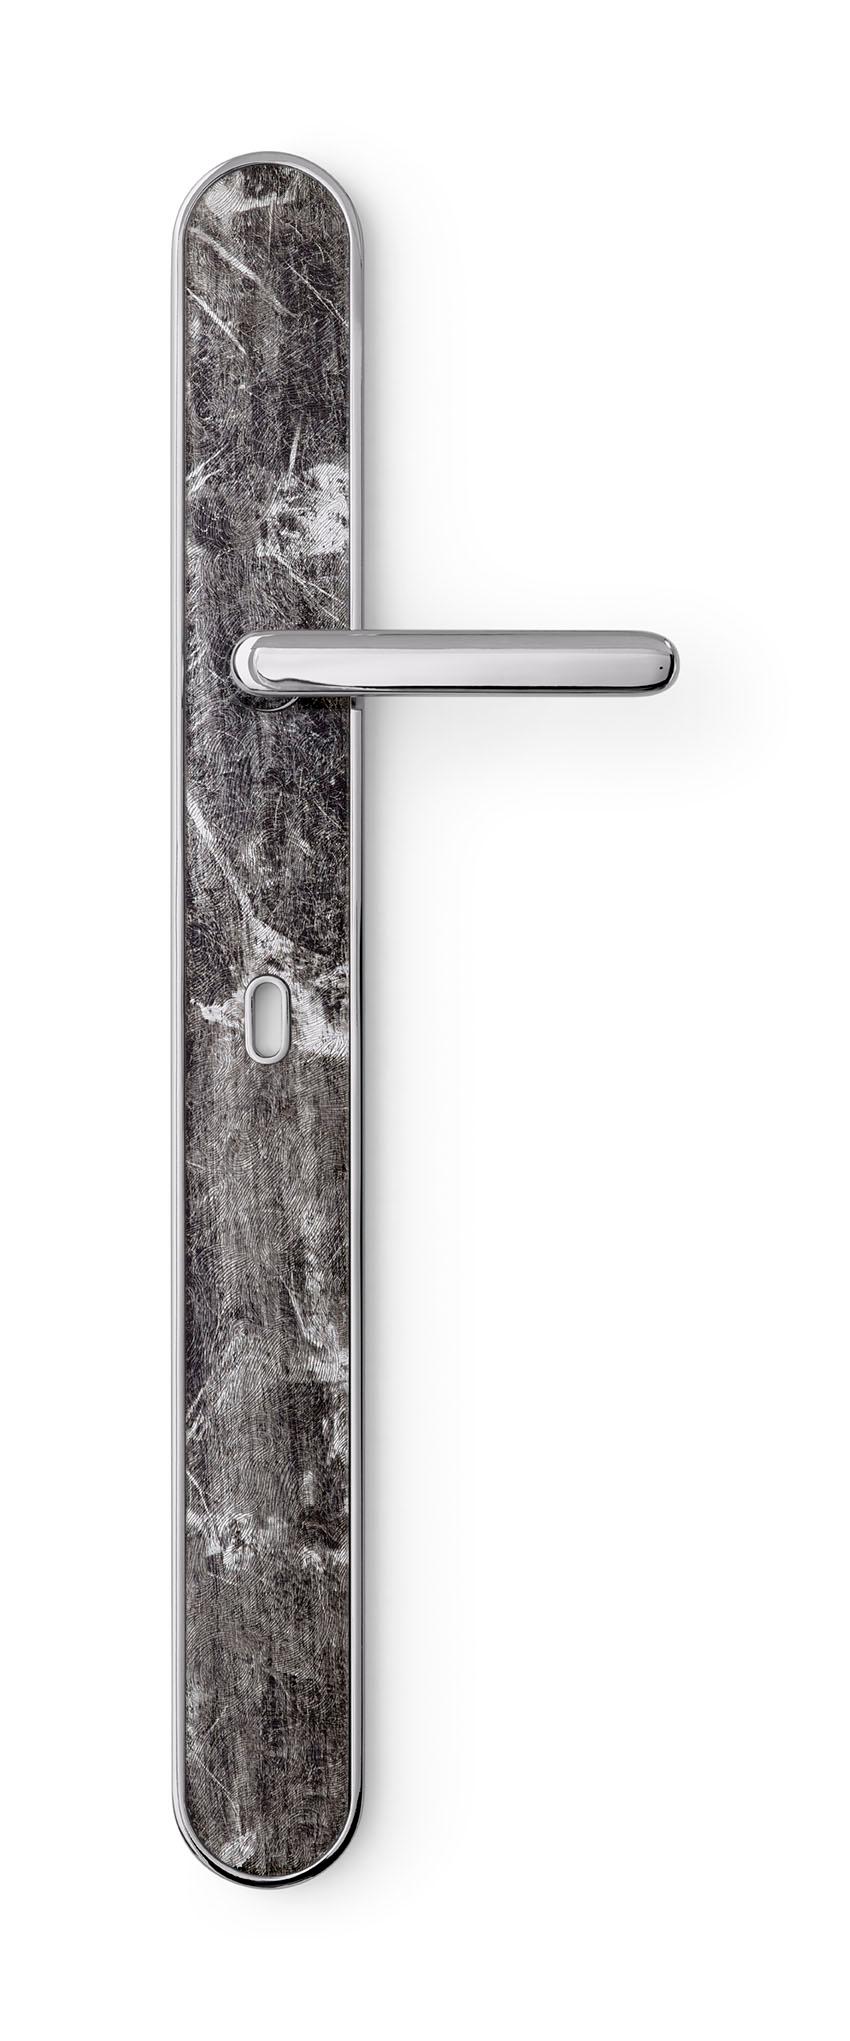 Door Handle Aluminum Plate Brass Handle Body Polished Chrome Finished Vetrite For Sale 2